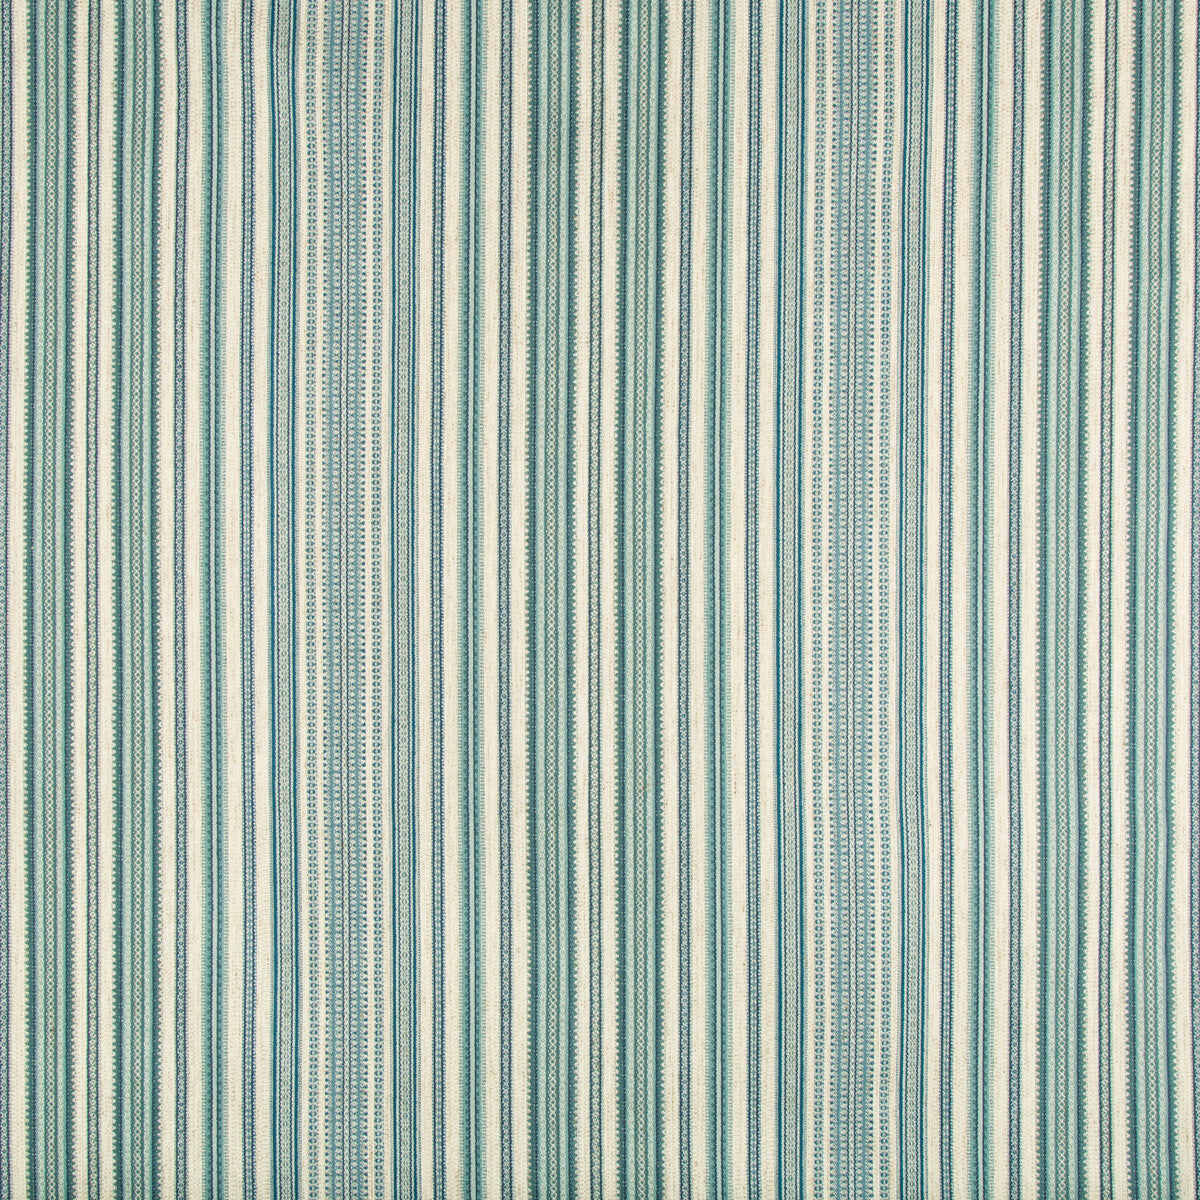 Kravet Contract fabric in 35036-1615 color - pattern 35036.1615.0 - by Kravet Contract in the Incase Crypton Gis collection